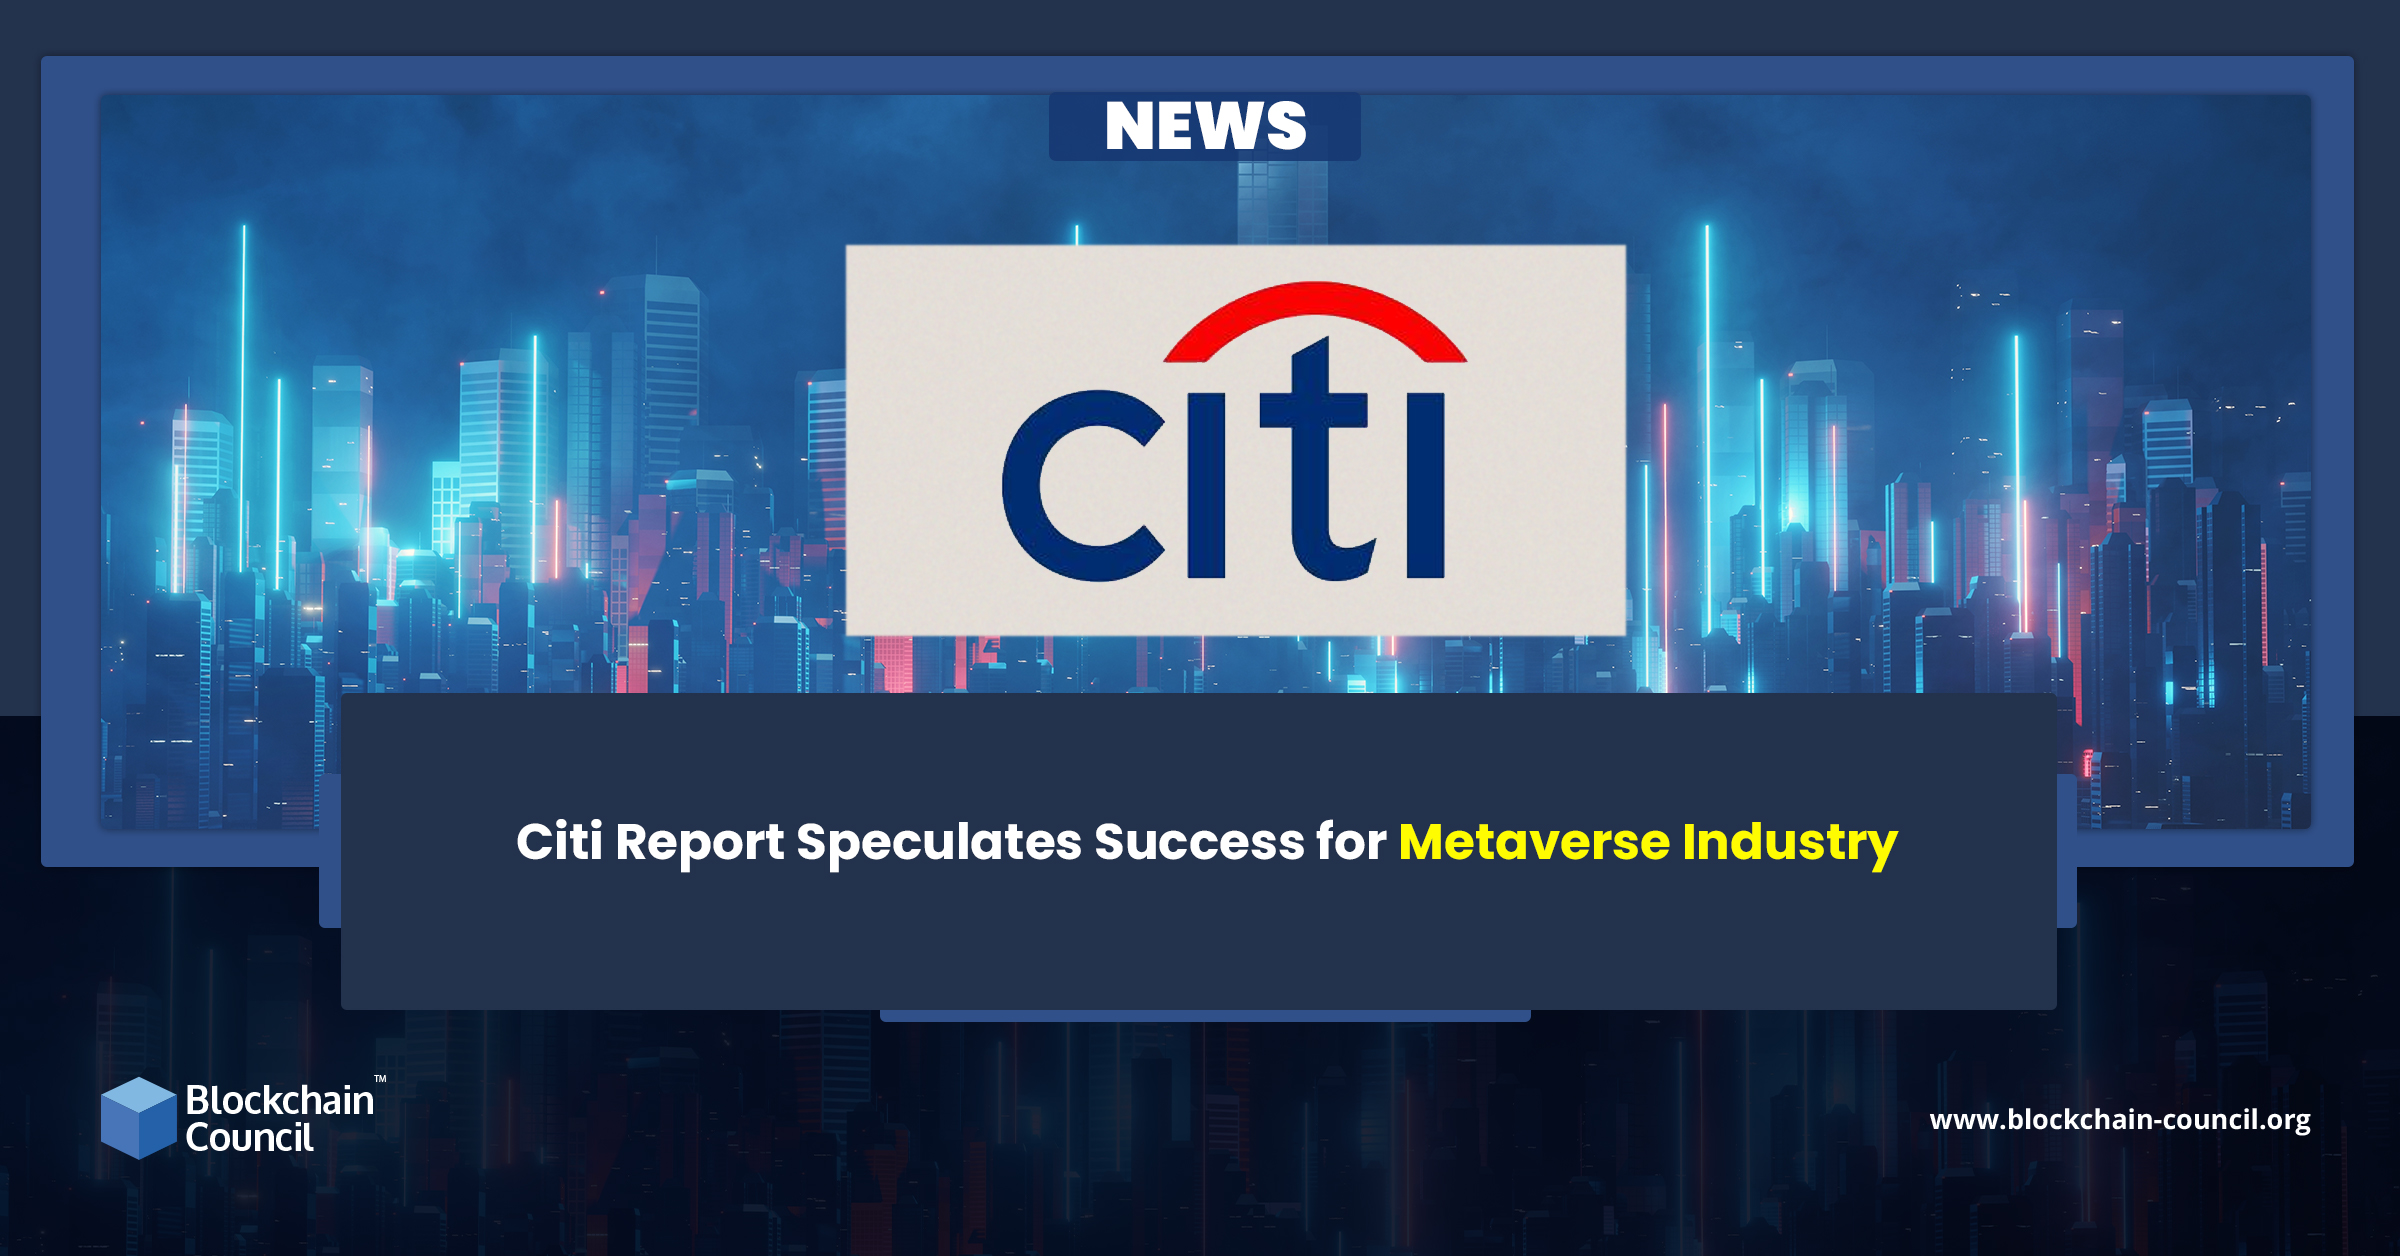 Citi Report Speculates Success for Metaverse Industry